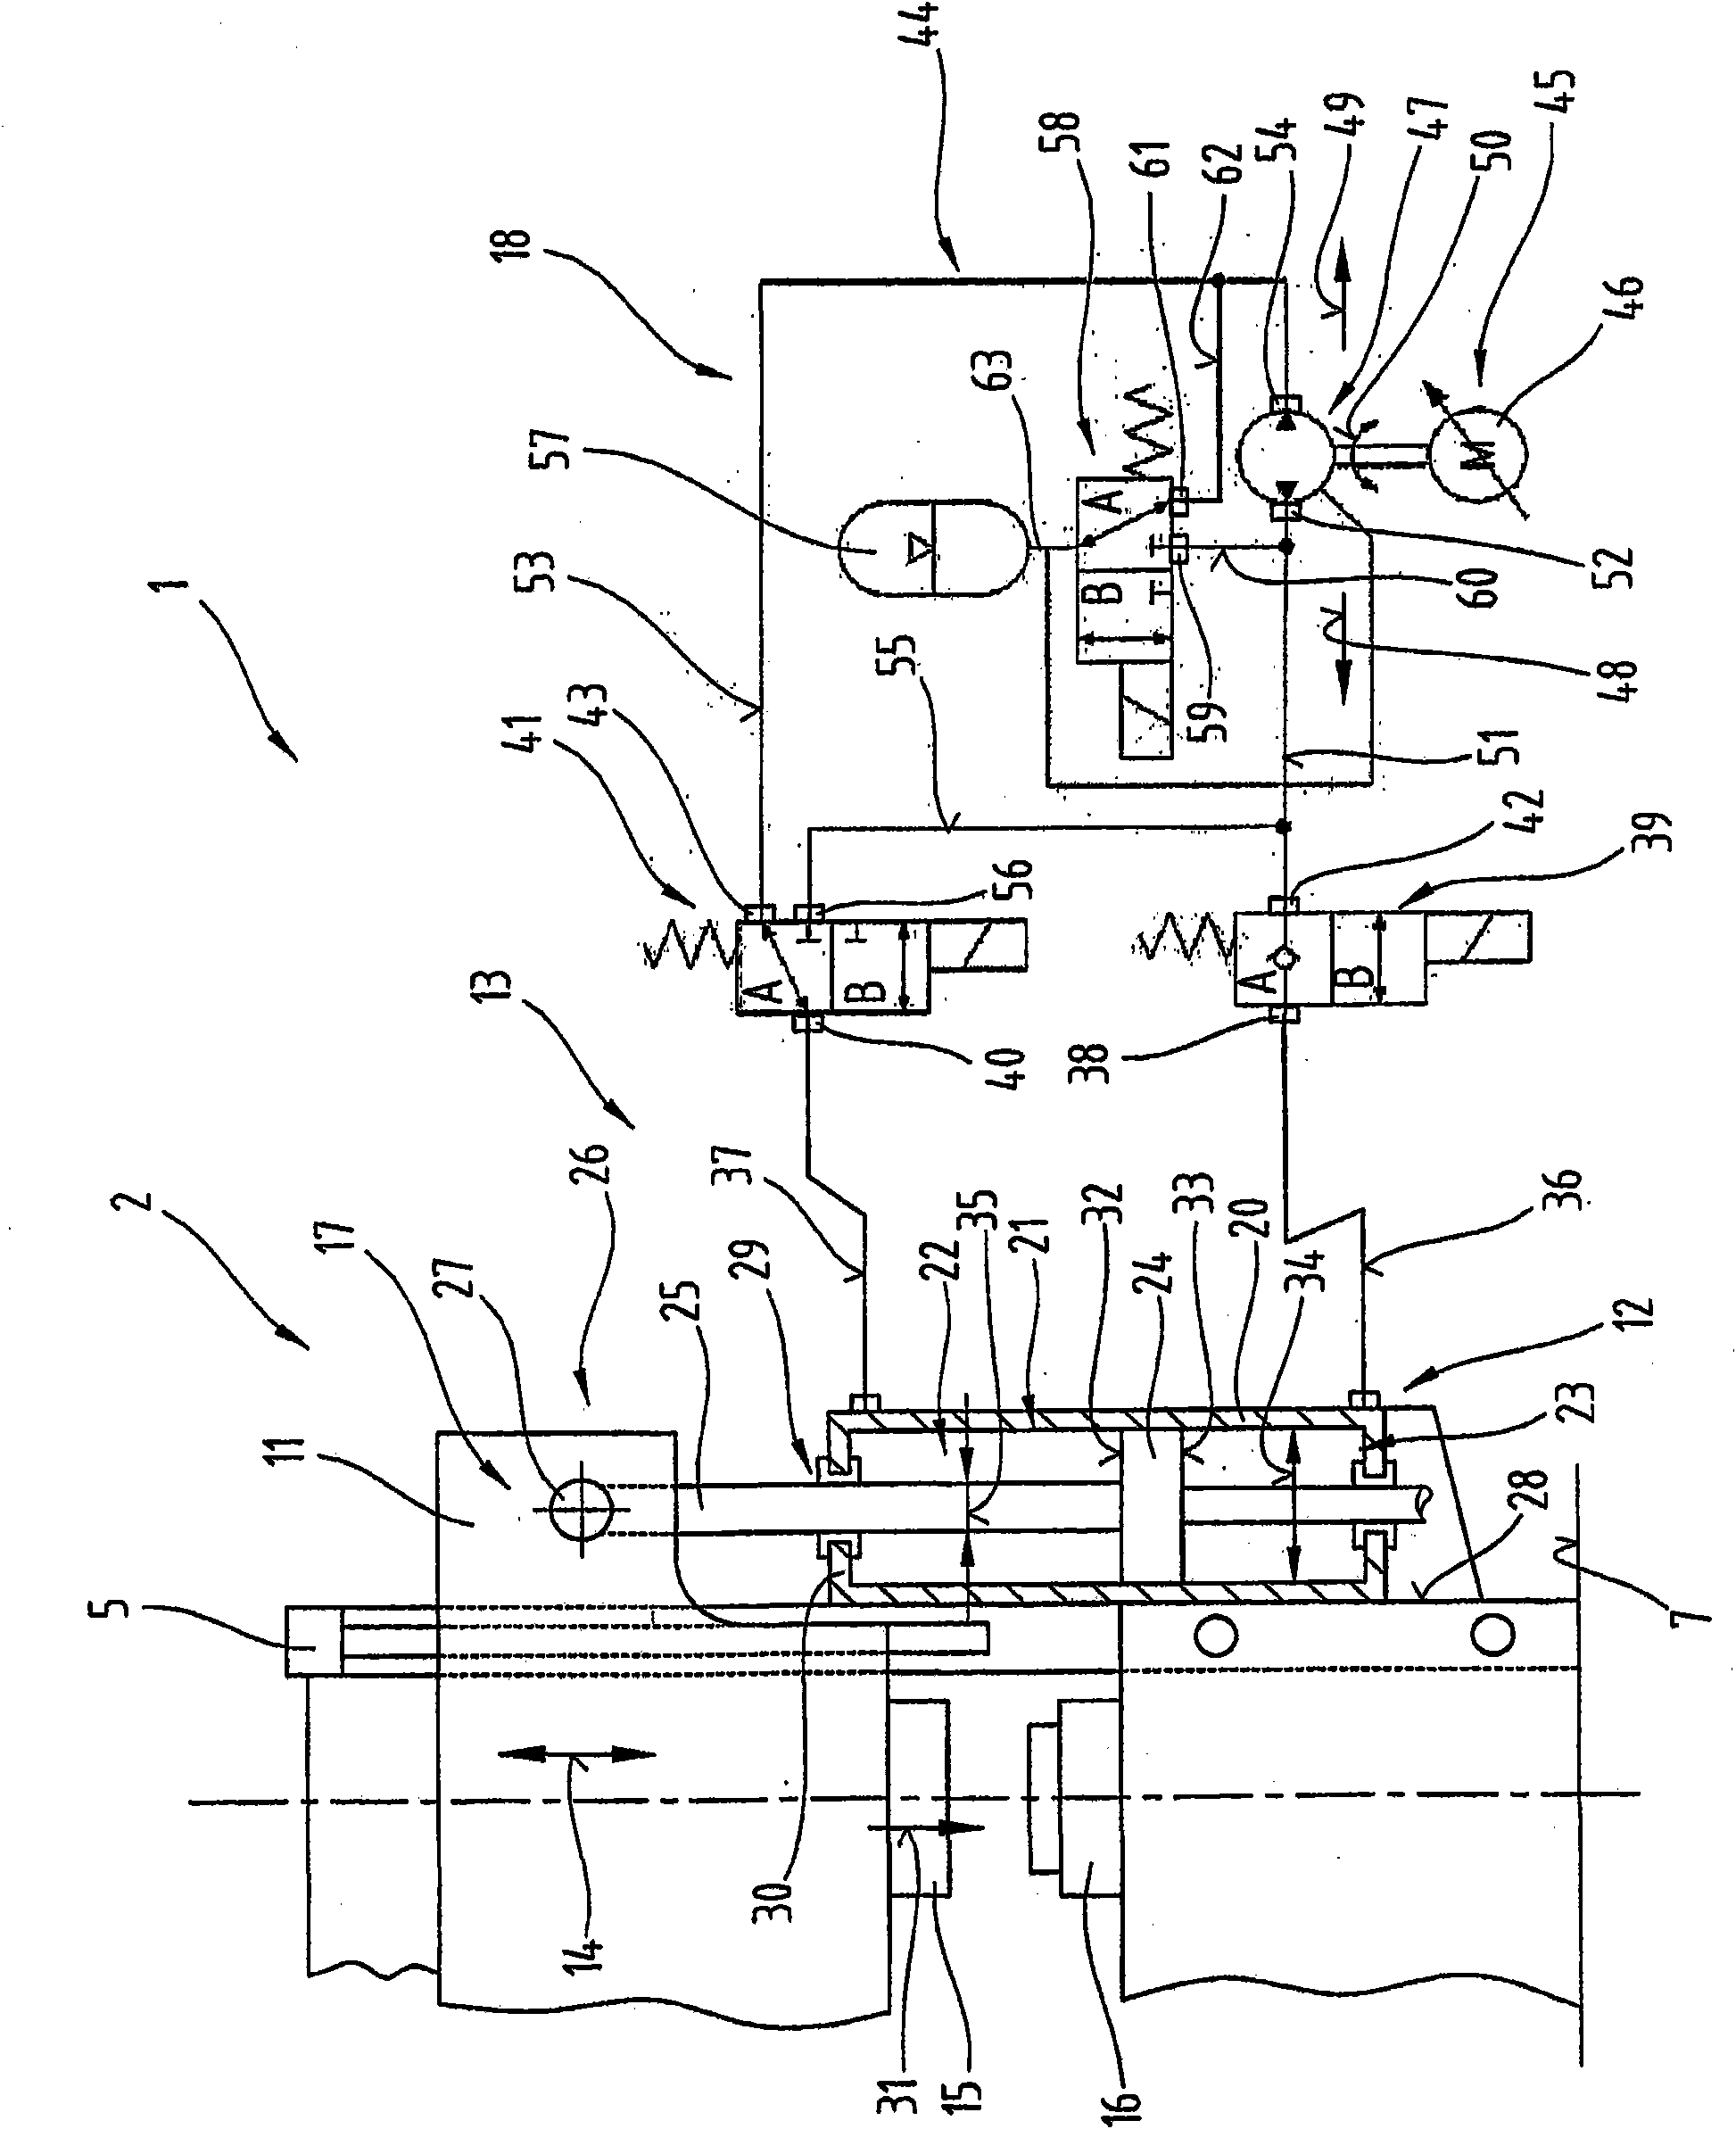 Drive device for a bending press